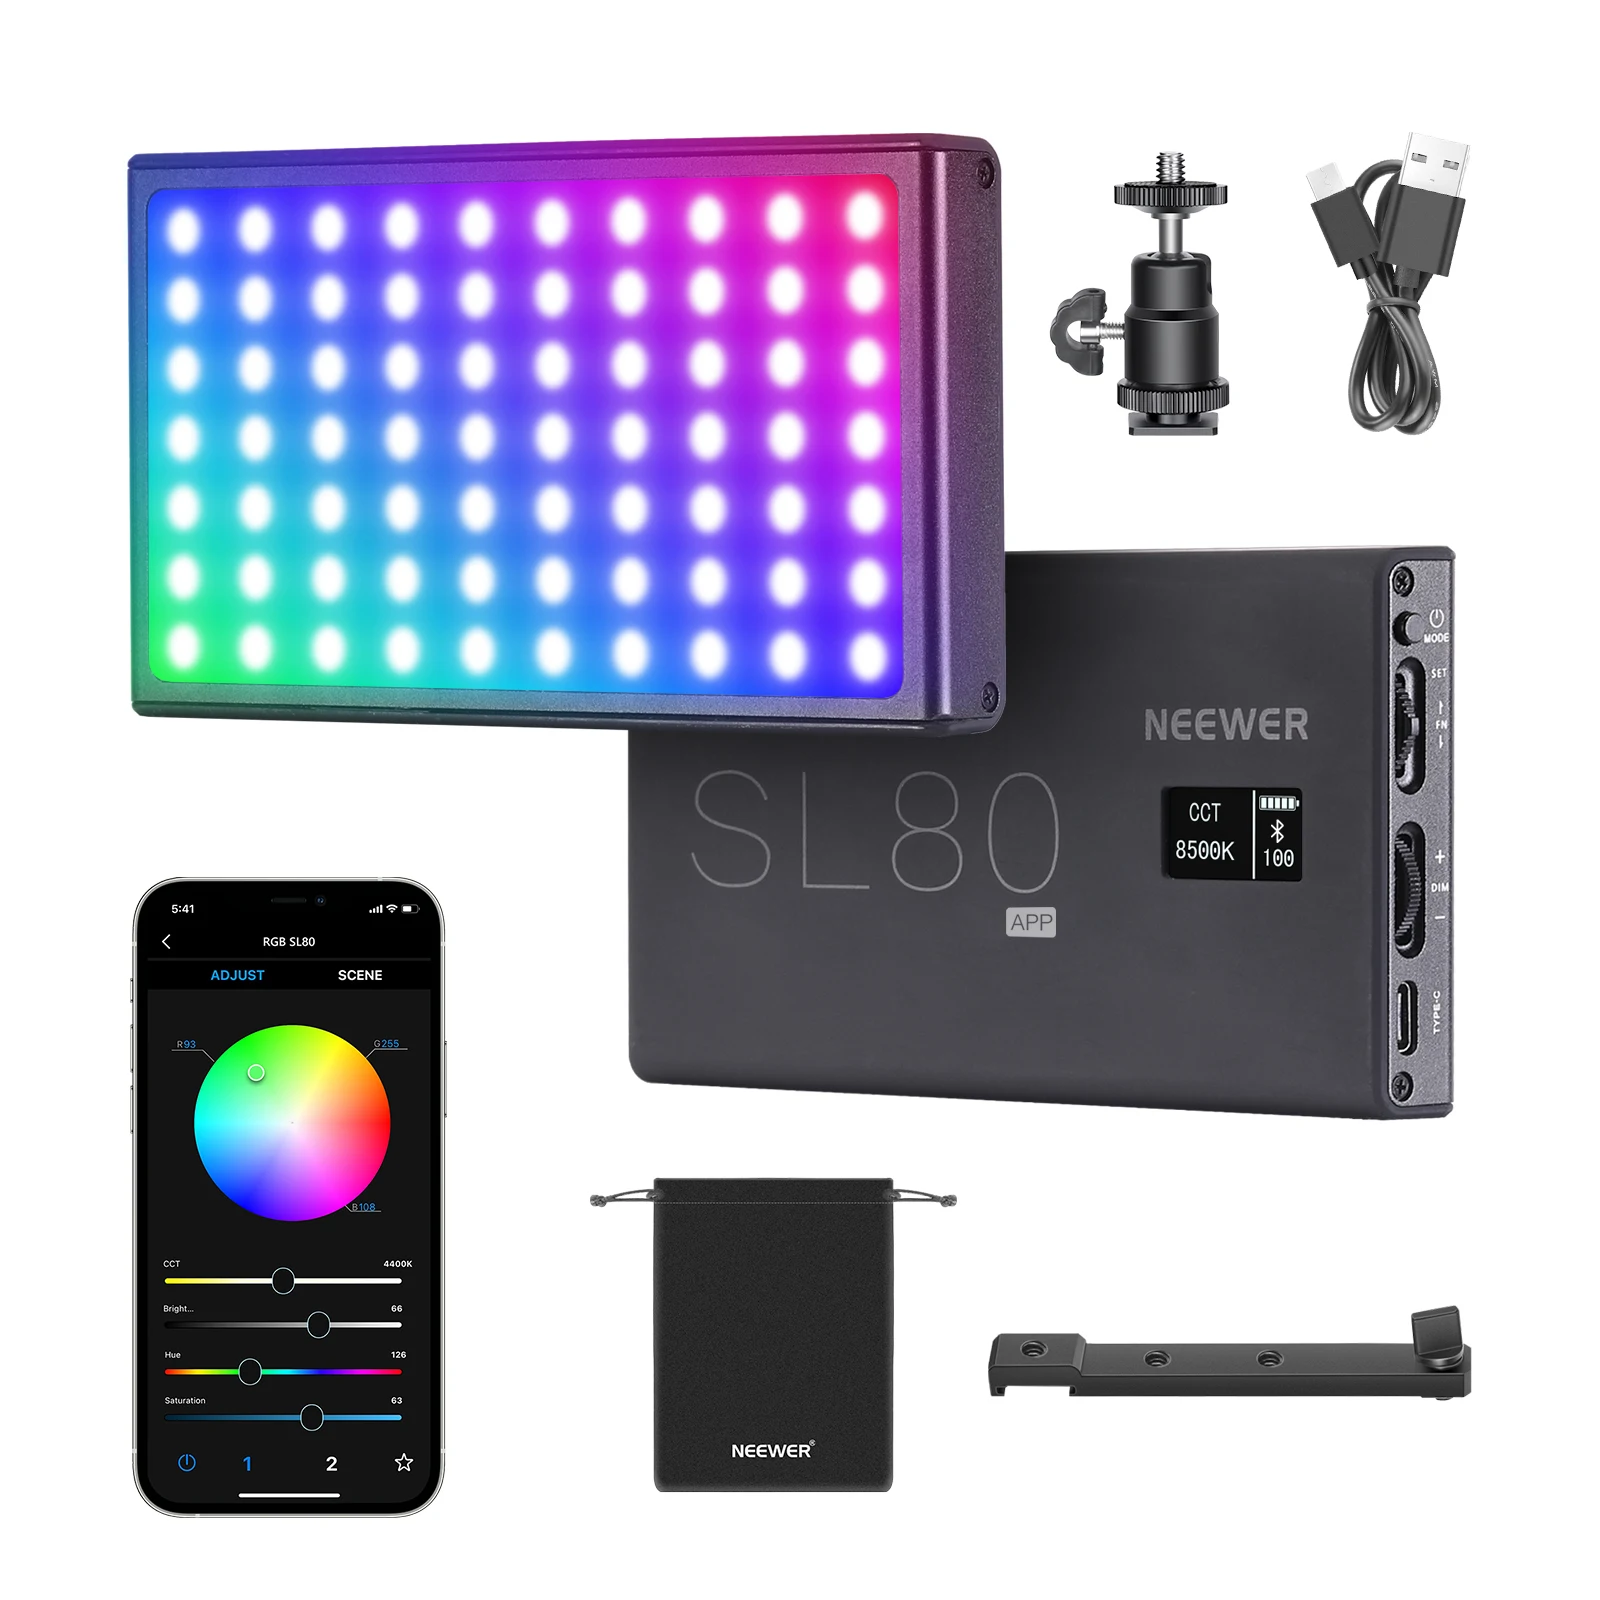 

Neewer SL80-APP Pocket RGB Video Light With App Control, Rechargeable Battery, LED Video Light For YouTube, Vlog And Photography